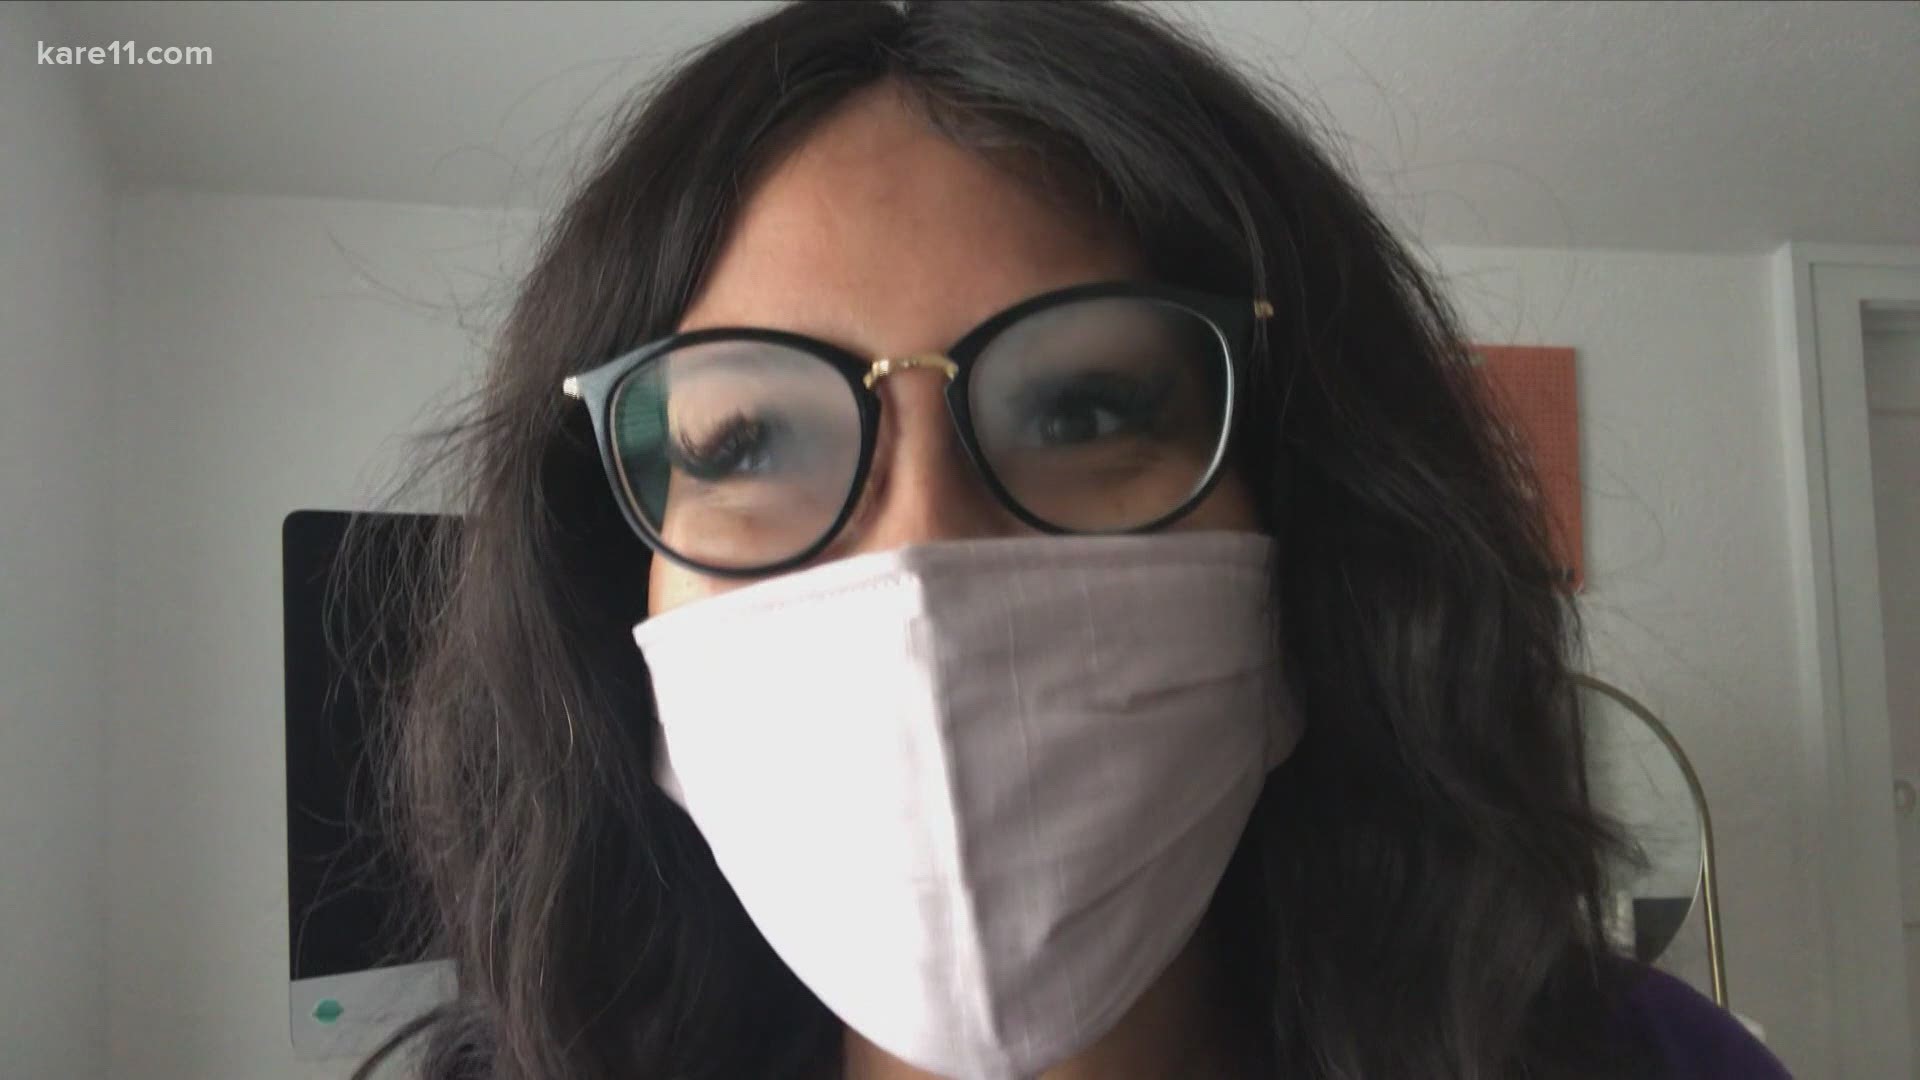 Kiya tests out some DIY tips to keep your glasses from fogging while wearing a mask